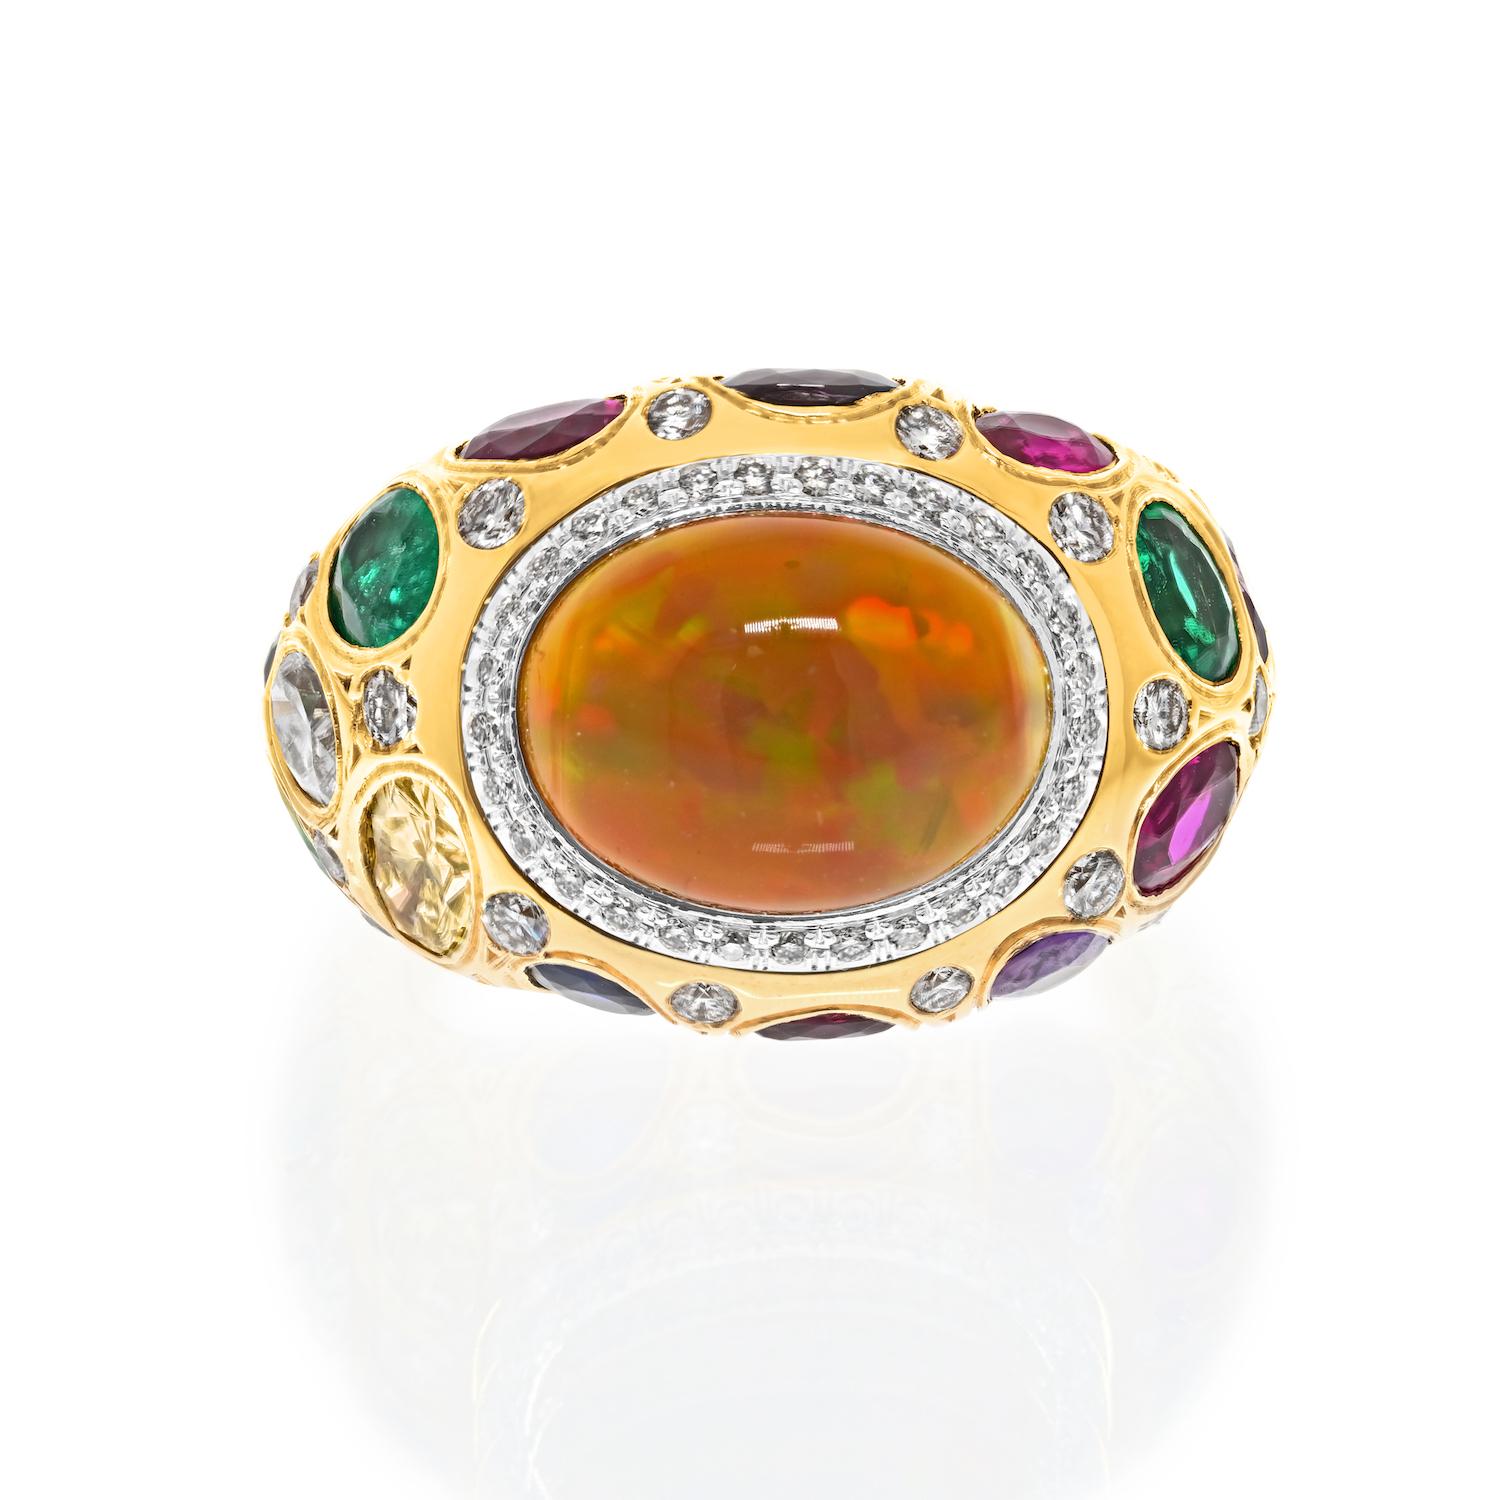 The Fire Opal Elegance: A Handmade Masterpiece.

This is a one-of-a-kind fire opal ring, lovingly crafted with a natural cabochon oval-cut fire opal. Set in 18k yellow gold, this bombe-style ring offers a delightful twist with a platinum rim bezel,